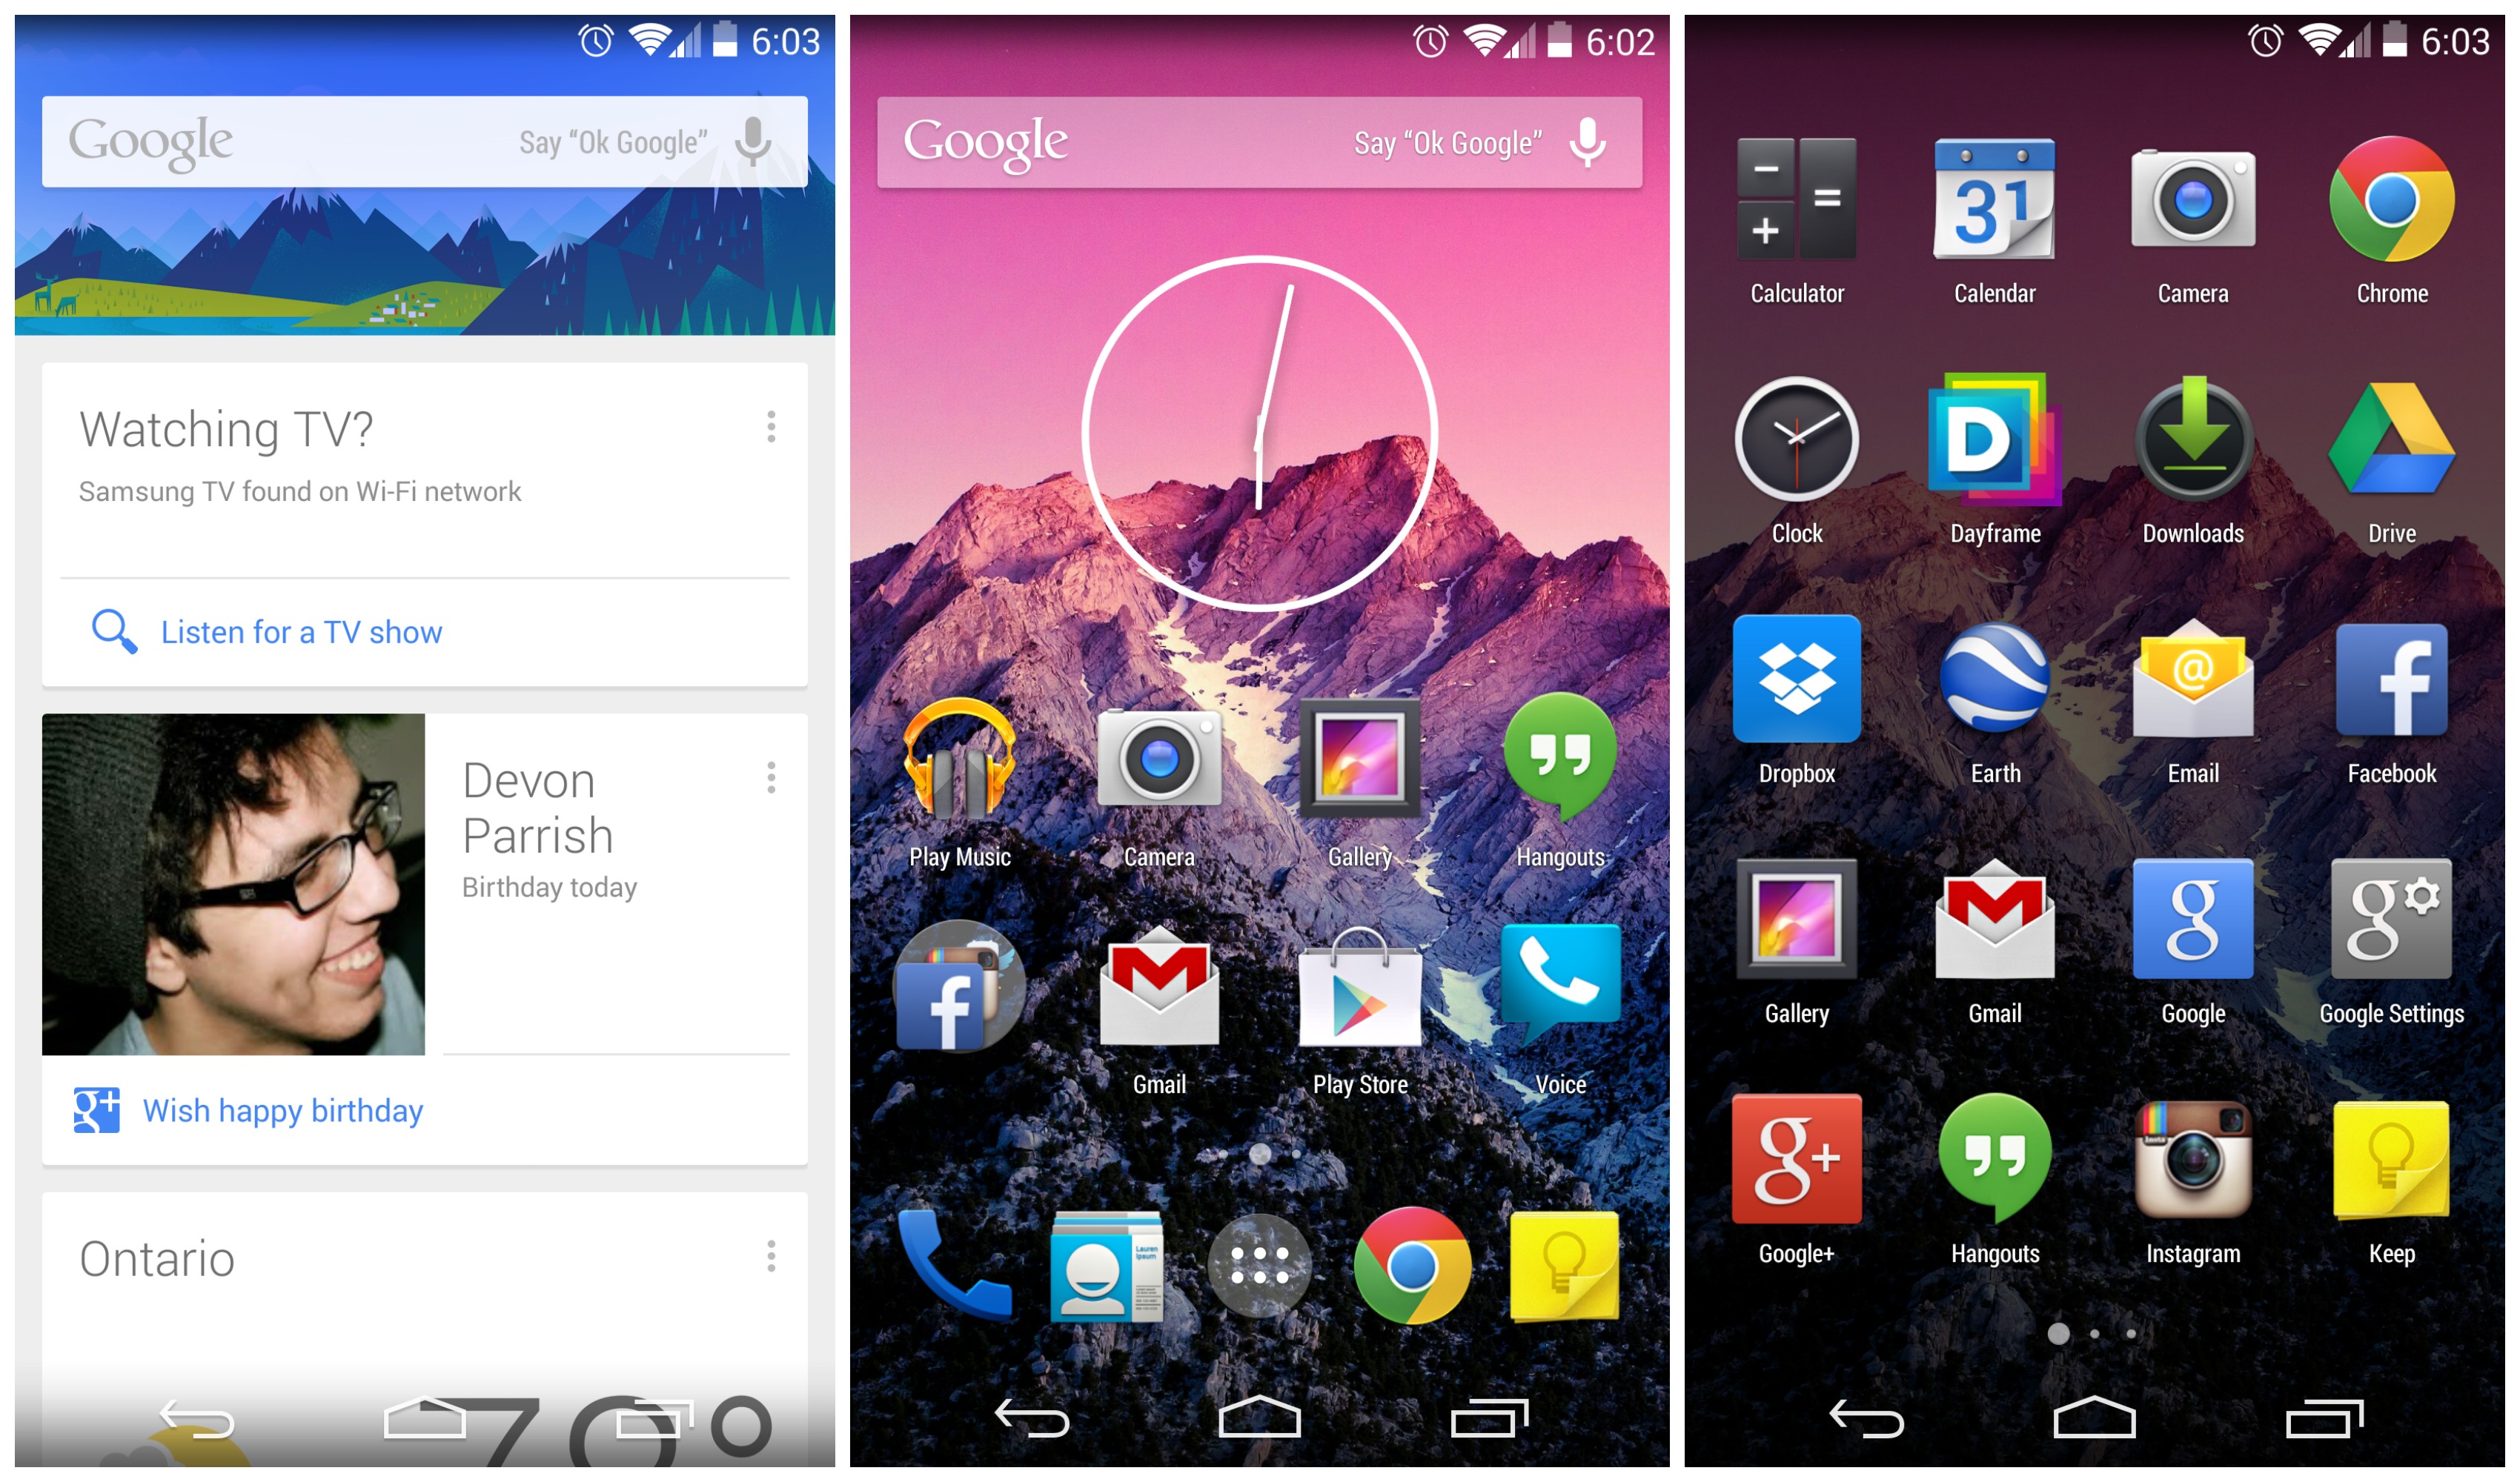 Google apps for android phones